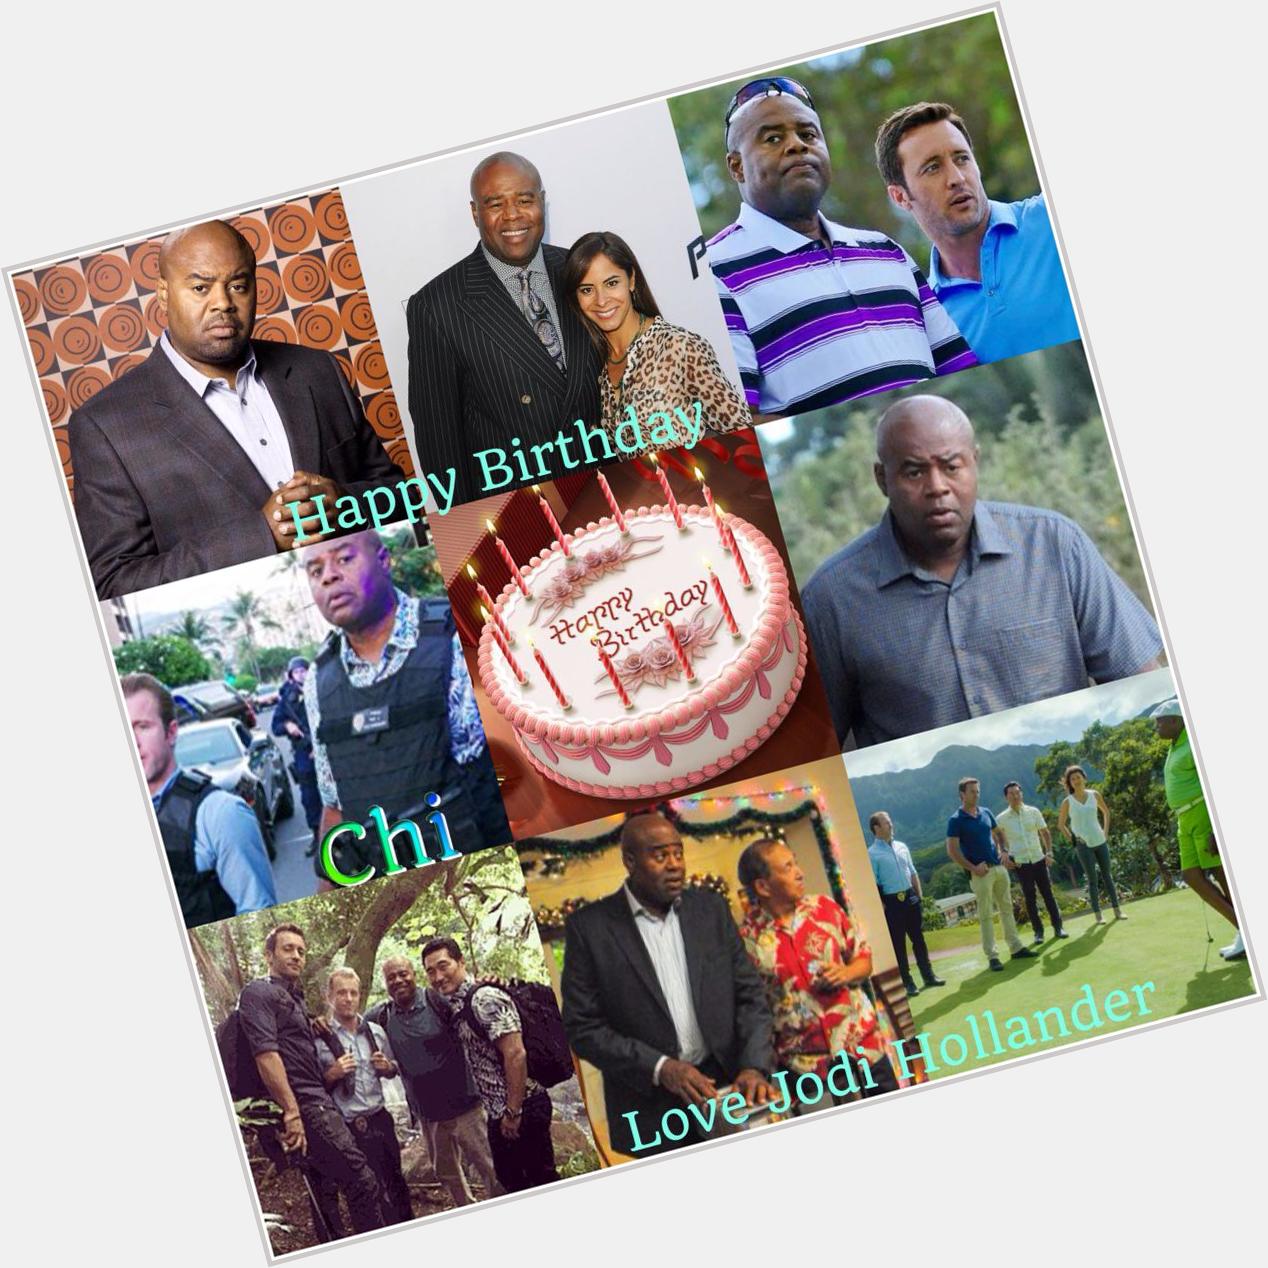  I want to wish Chi McBride a very Happy Birthday and a fabulous day. 